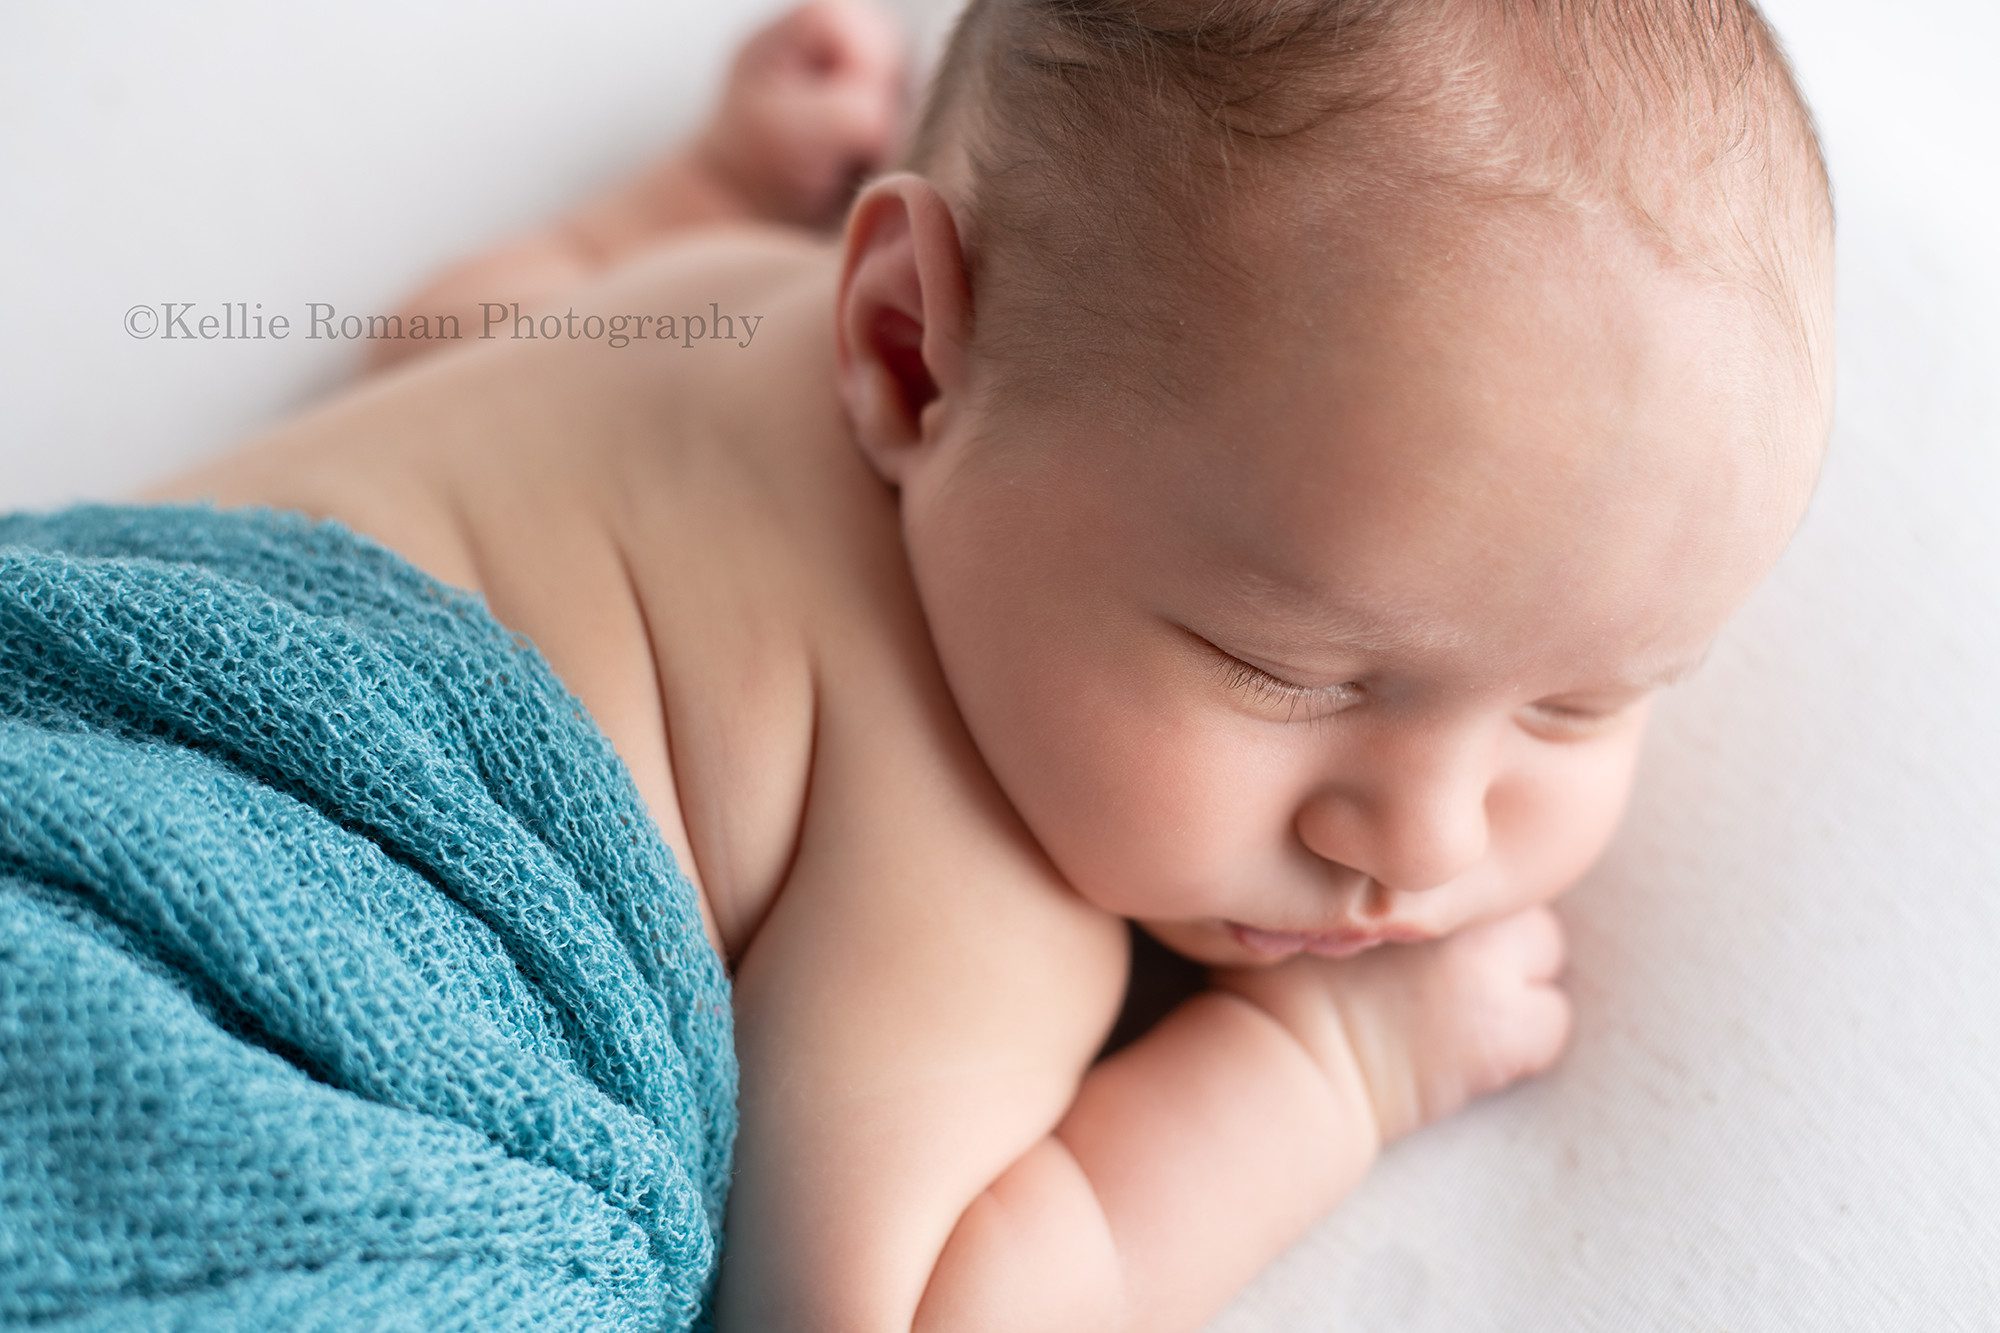 studio newborn session a baby. boy in a milwaukee photographers studio is sleeping on a bean bag covered with white fabric he has a teal wrap cover his diaper and the shot is taken from above his head